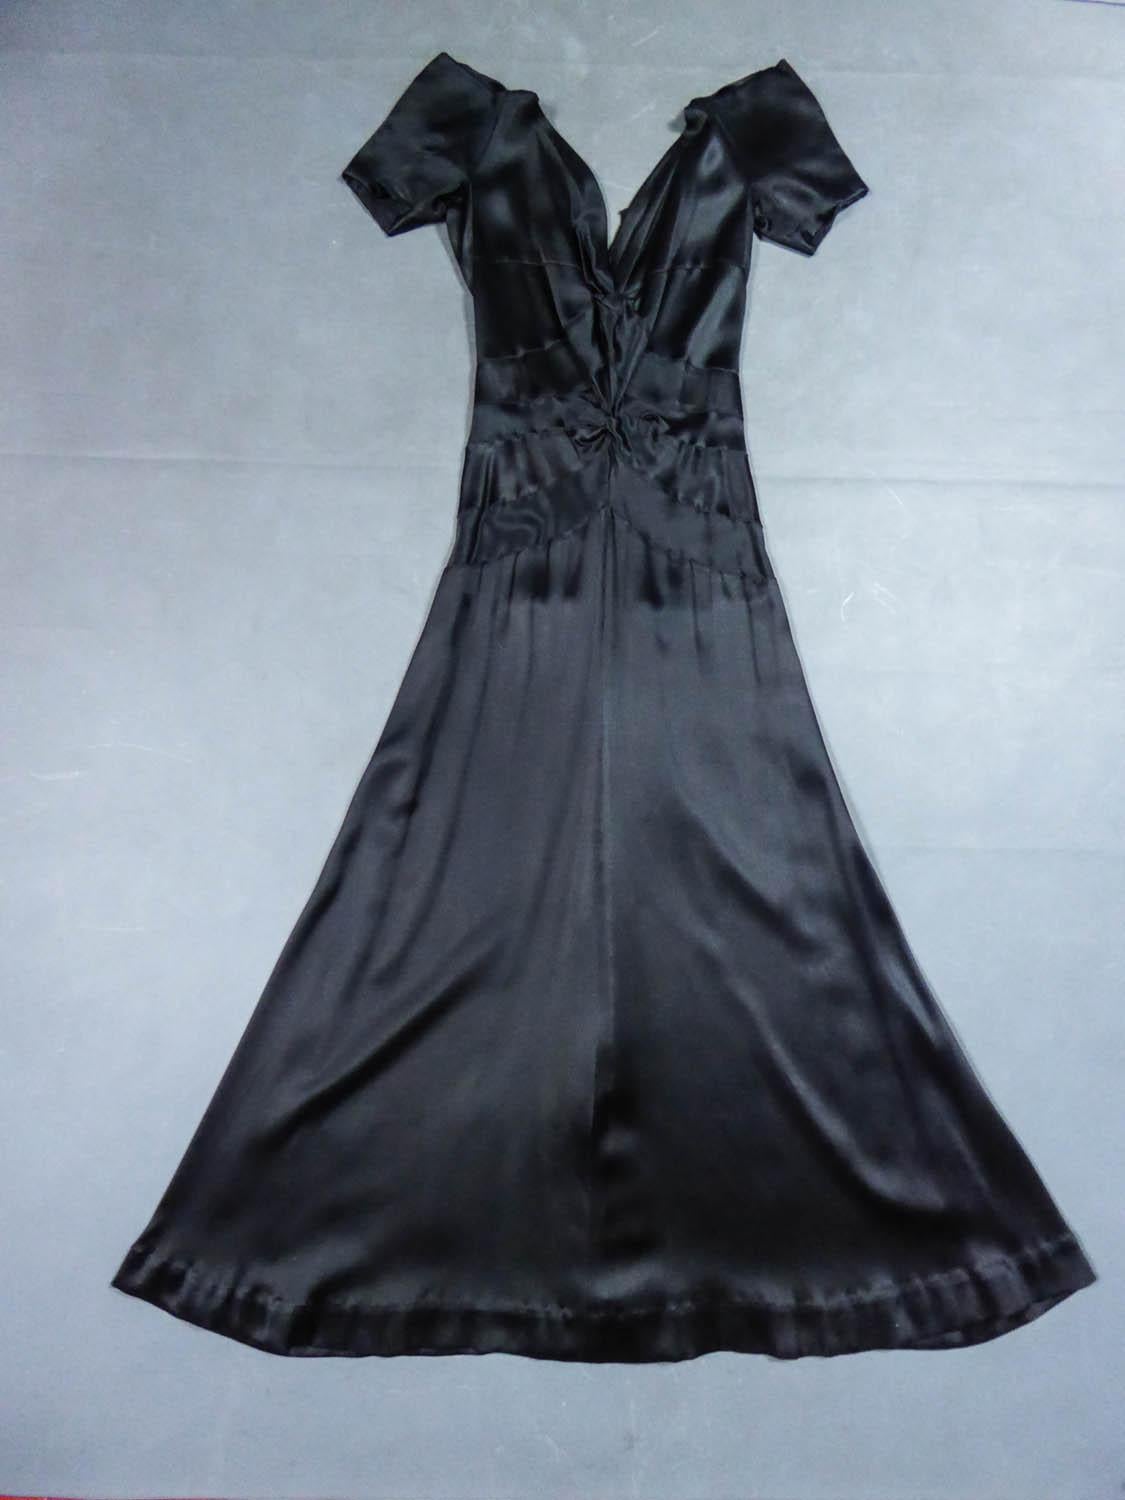 Circa 1935
France

Evening dress in Duchess black satin from the famous french Couture designer house Jeanne Paquin and dating back to the 1930s. Typical cut in bias of this period by hand-stitched panels celebrating a slender and glamorous